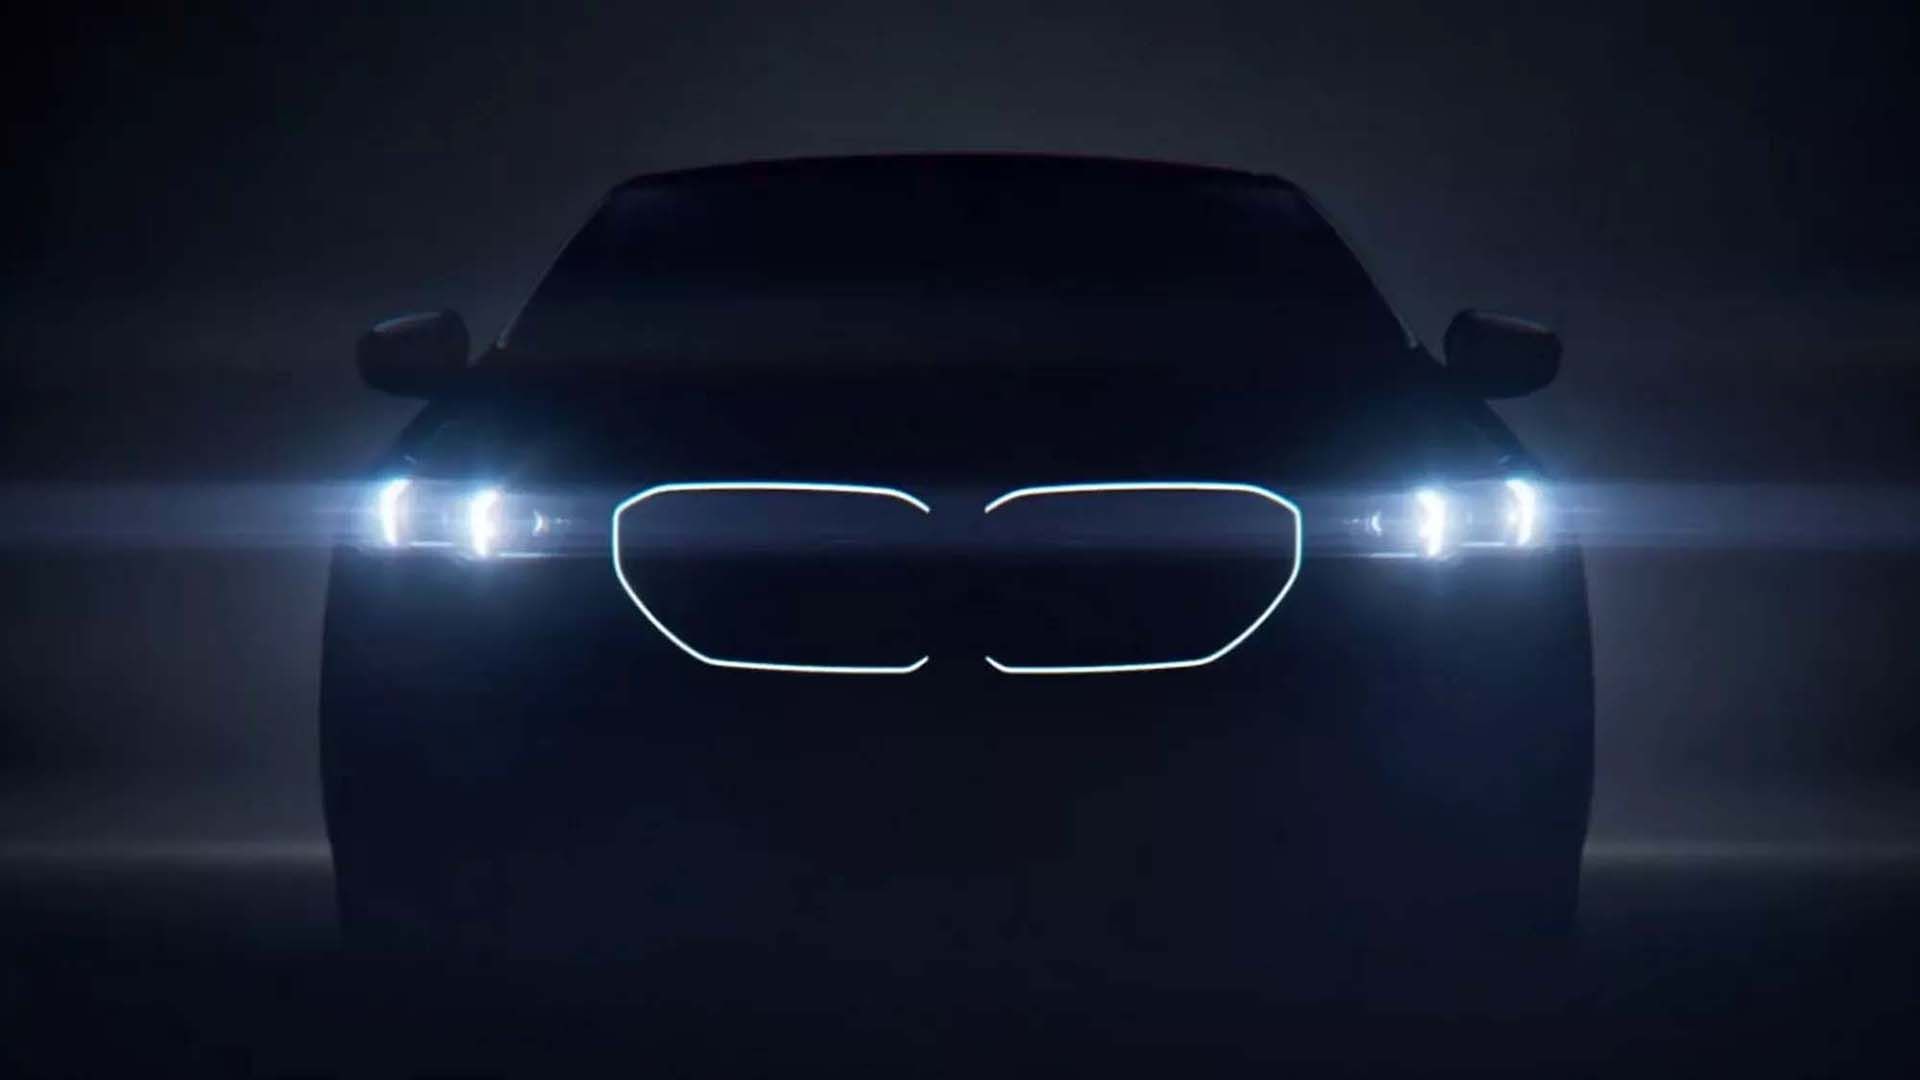 Illuminated front grille and headlights of the 2024 BMW i5